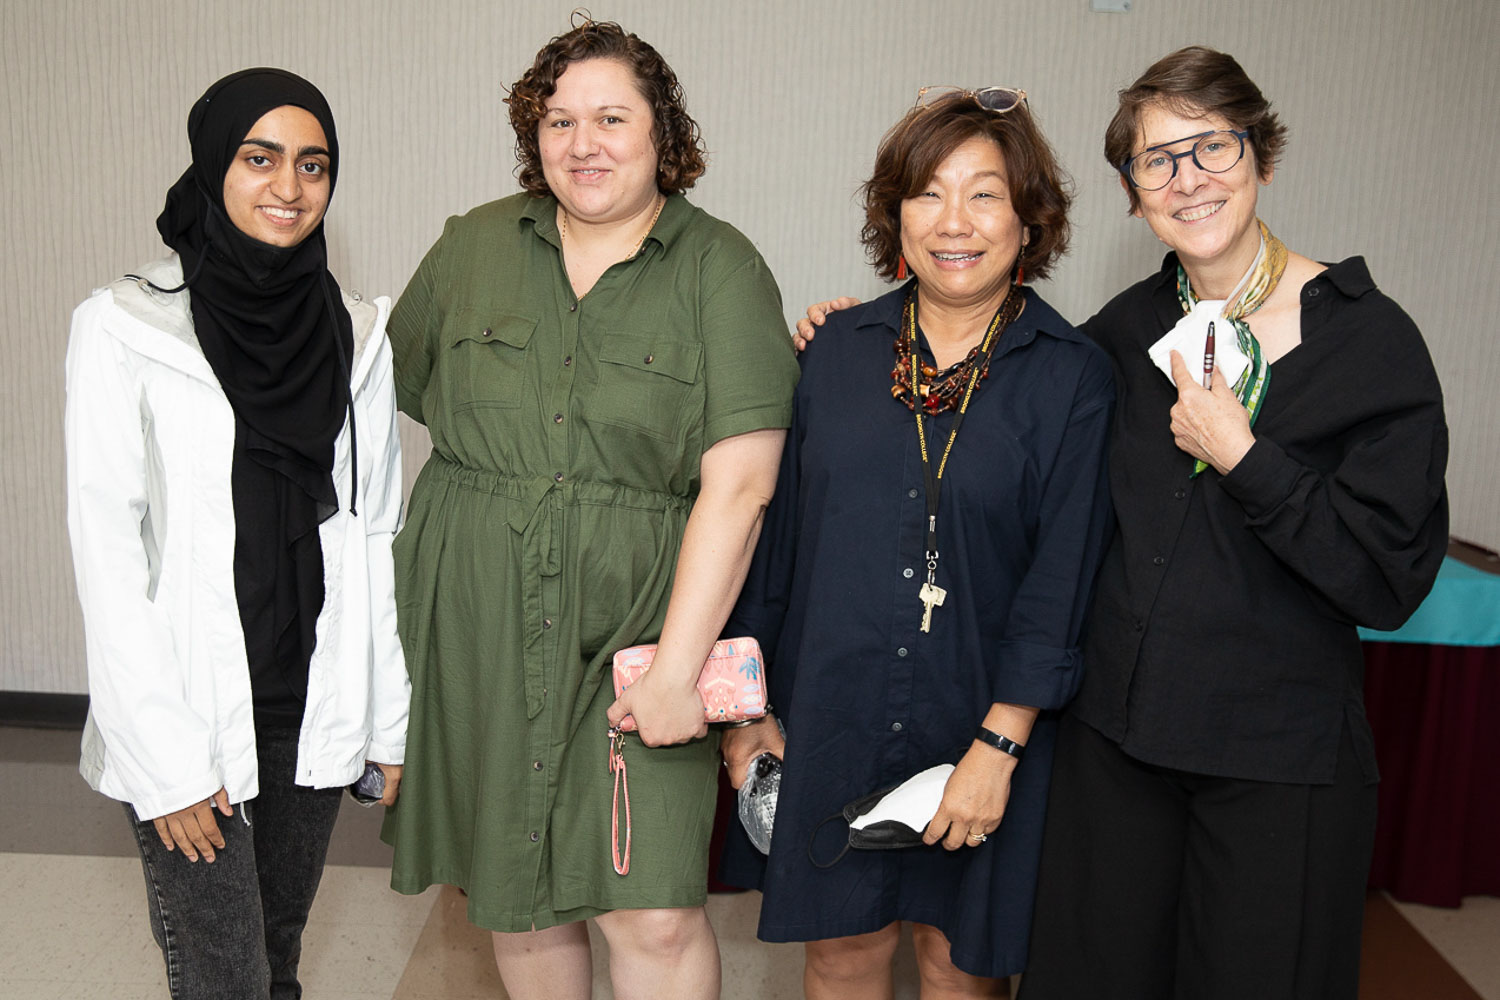 Director of the Women’s Center Sau-Fong Au (Second from Right) welcomes the new LGBTQ Resource Center Director Kelly Spivey (Right) at an event in the fall. The center has received $40,000 from the CUNY LGBTQIA+ Consortium for events and other support programing initiatives for the 2022–2023 academic year.